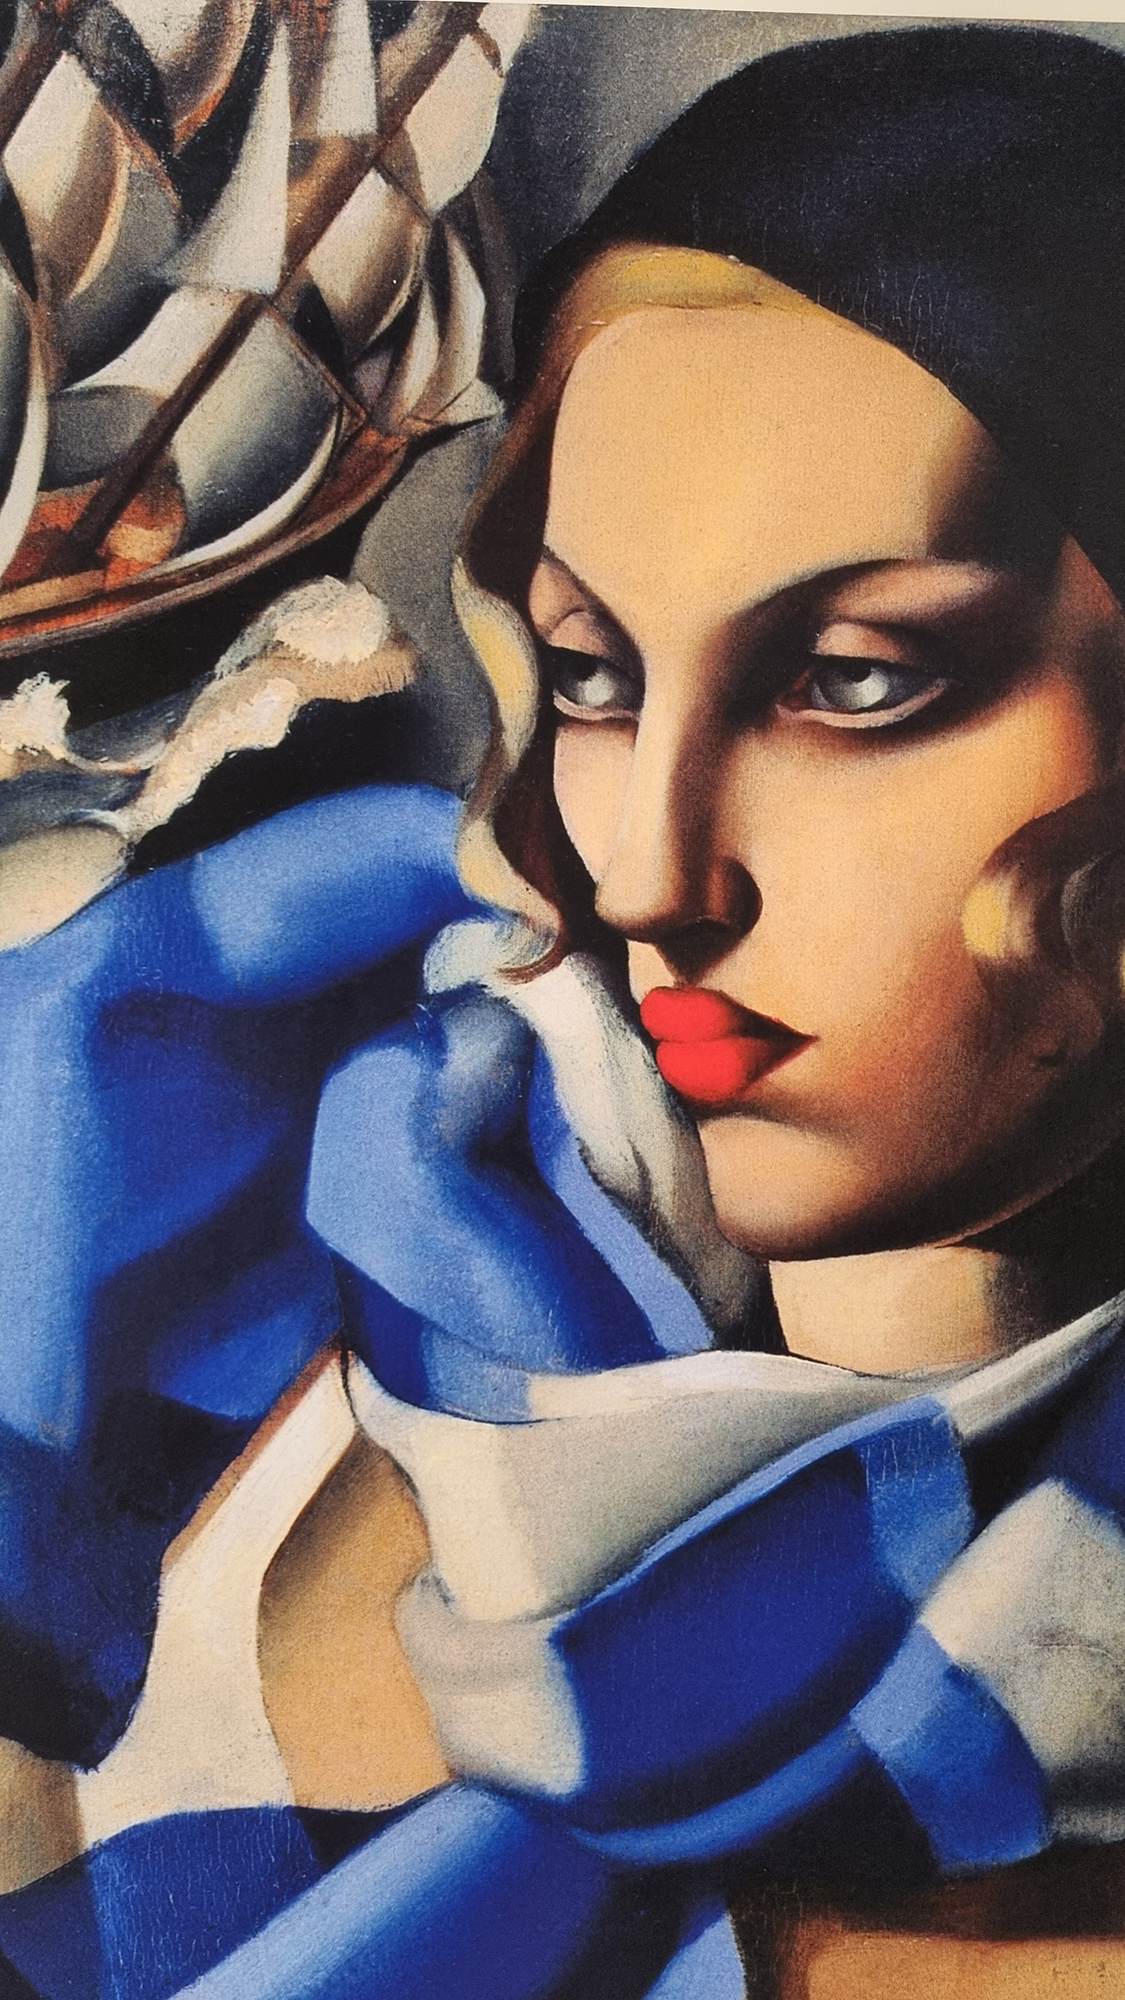 Tamara De Lempicka Limited Edition with Lempicka Estate (New York) Authenticated Certificate. - Image 2 of 5